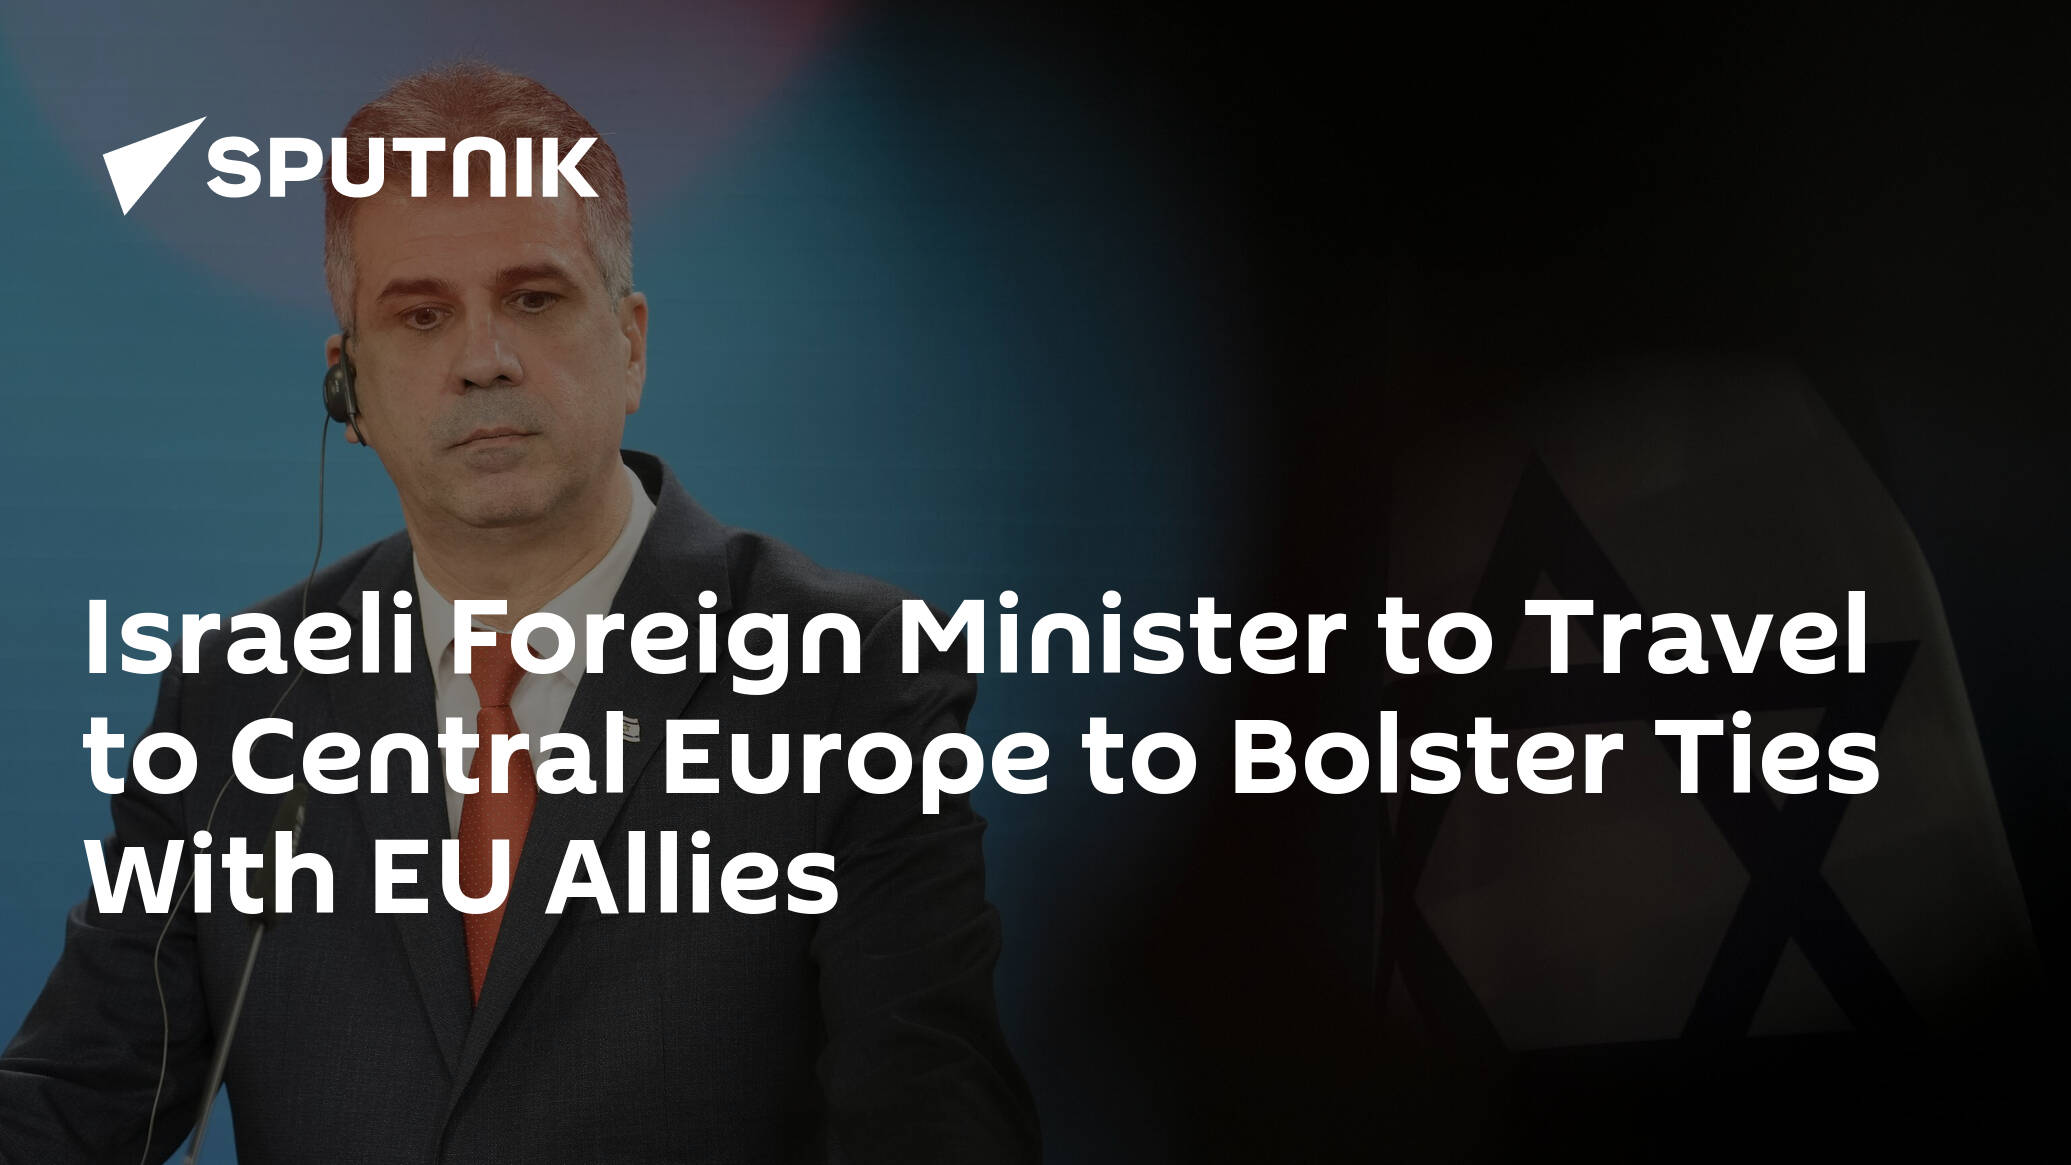 Israeli Foreign Minister to Travel to Central Europe to Bolster Ties With EU Allies